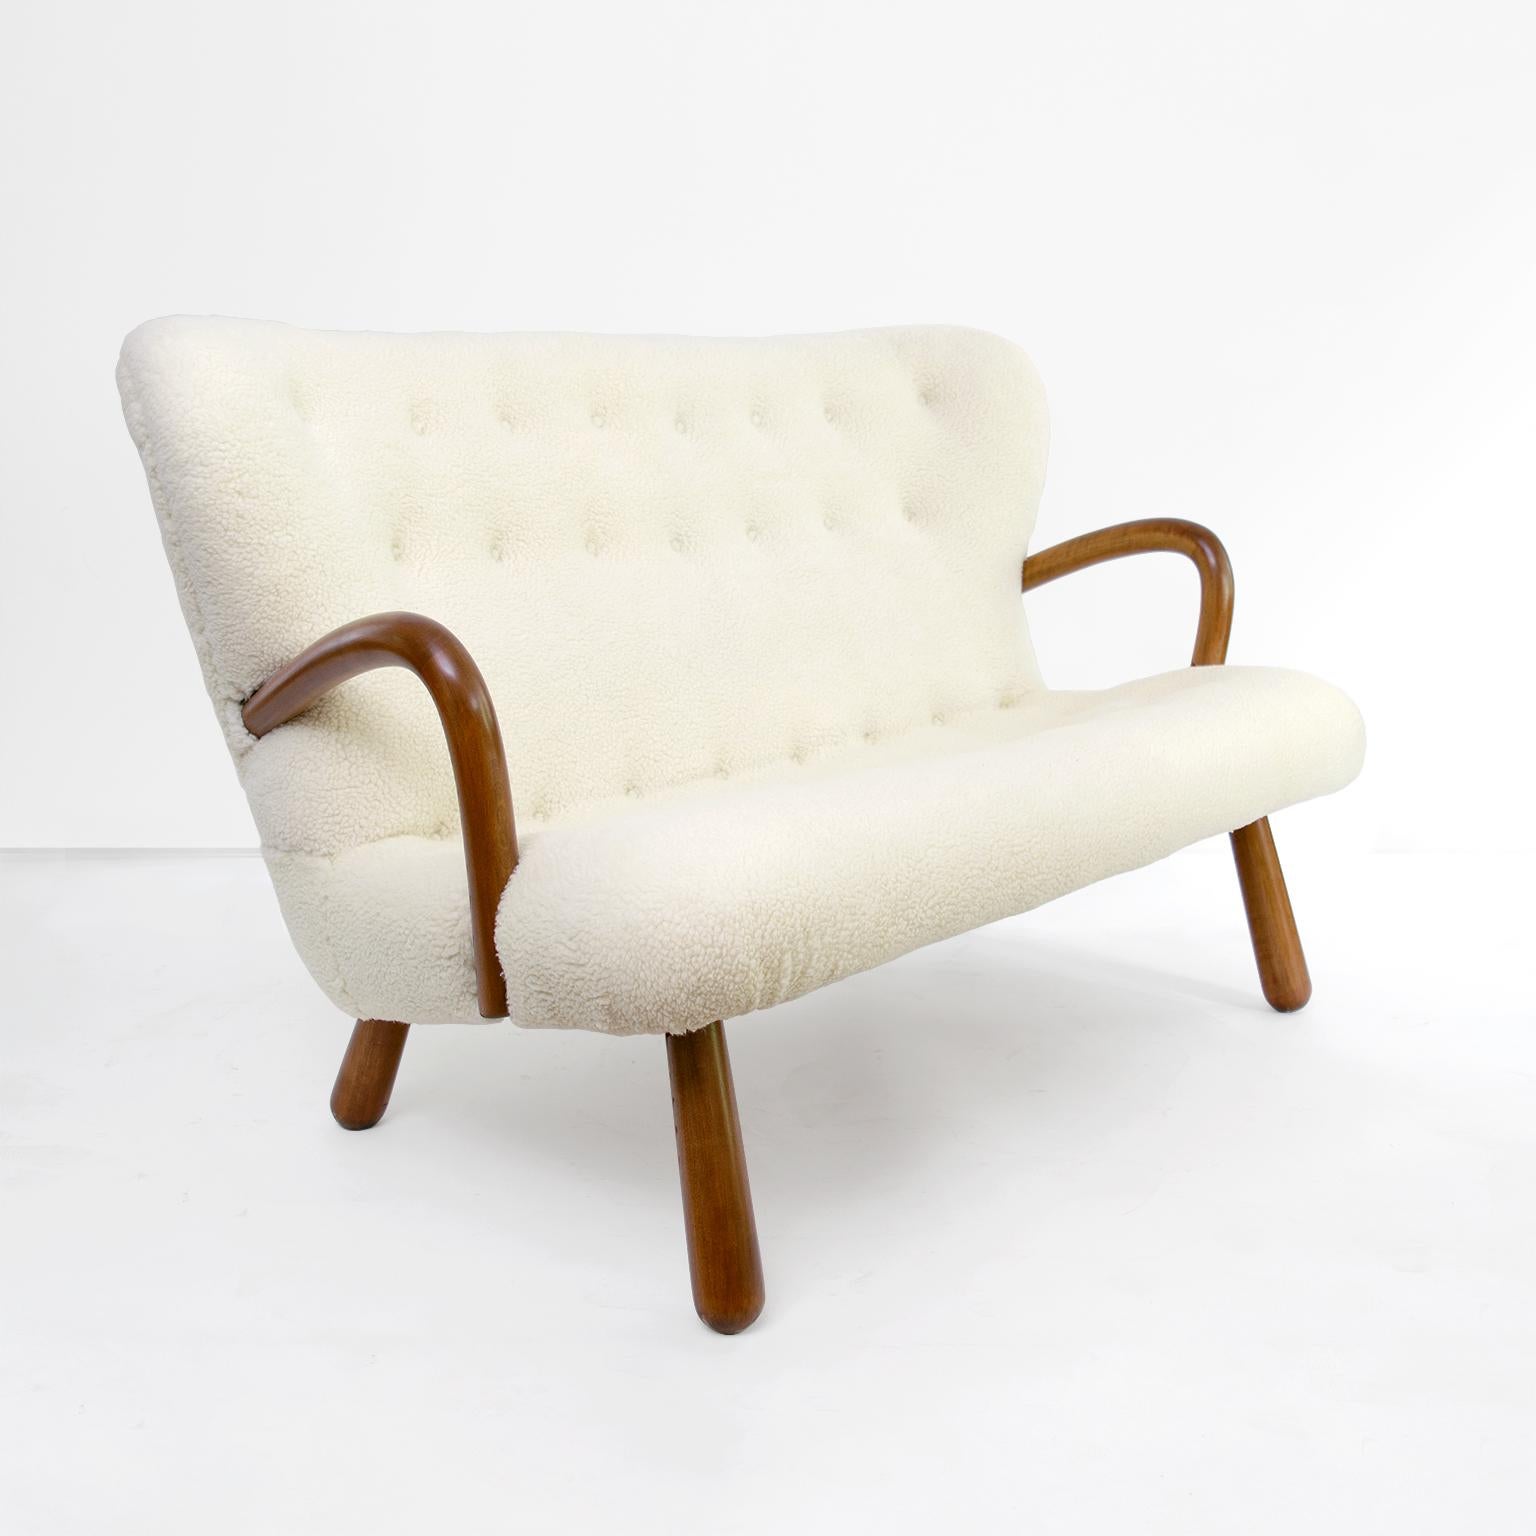 Scandinavian Modern settee attribute to Phillip Arctander and first introduced circa 1944 and produced by Nordisk Staal & Møbel Central, Denmark. The settee is constructed of stained beech wood and has been newly restored and reupholstered in